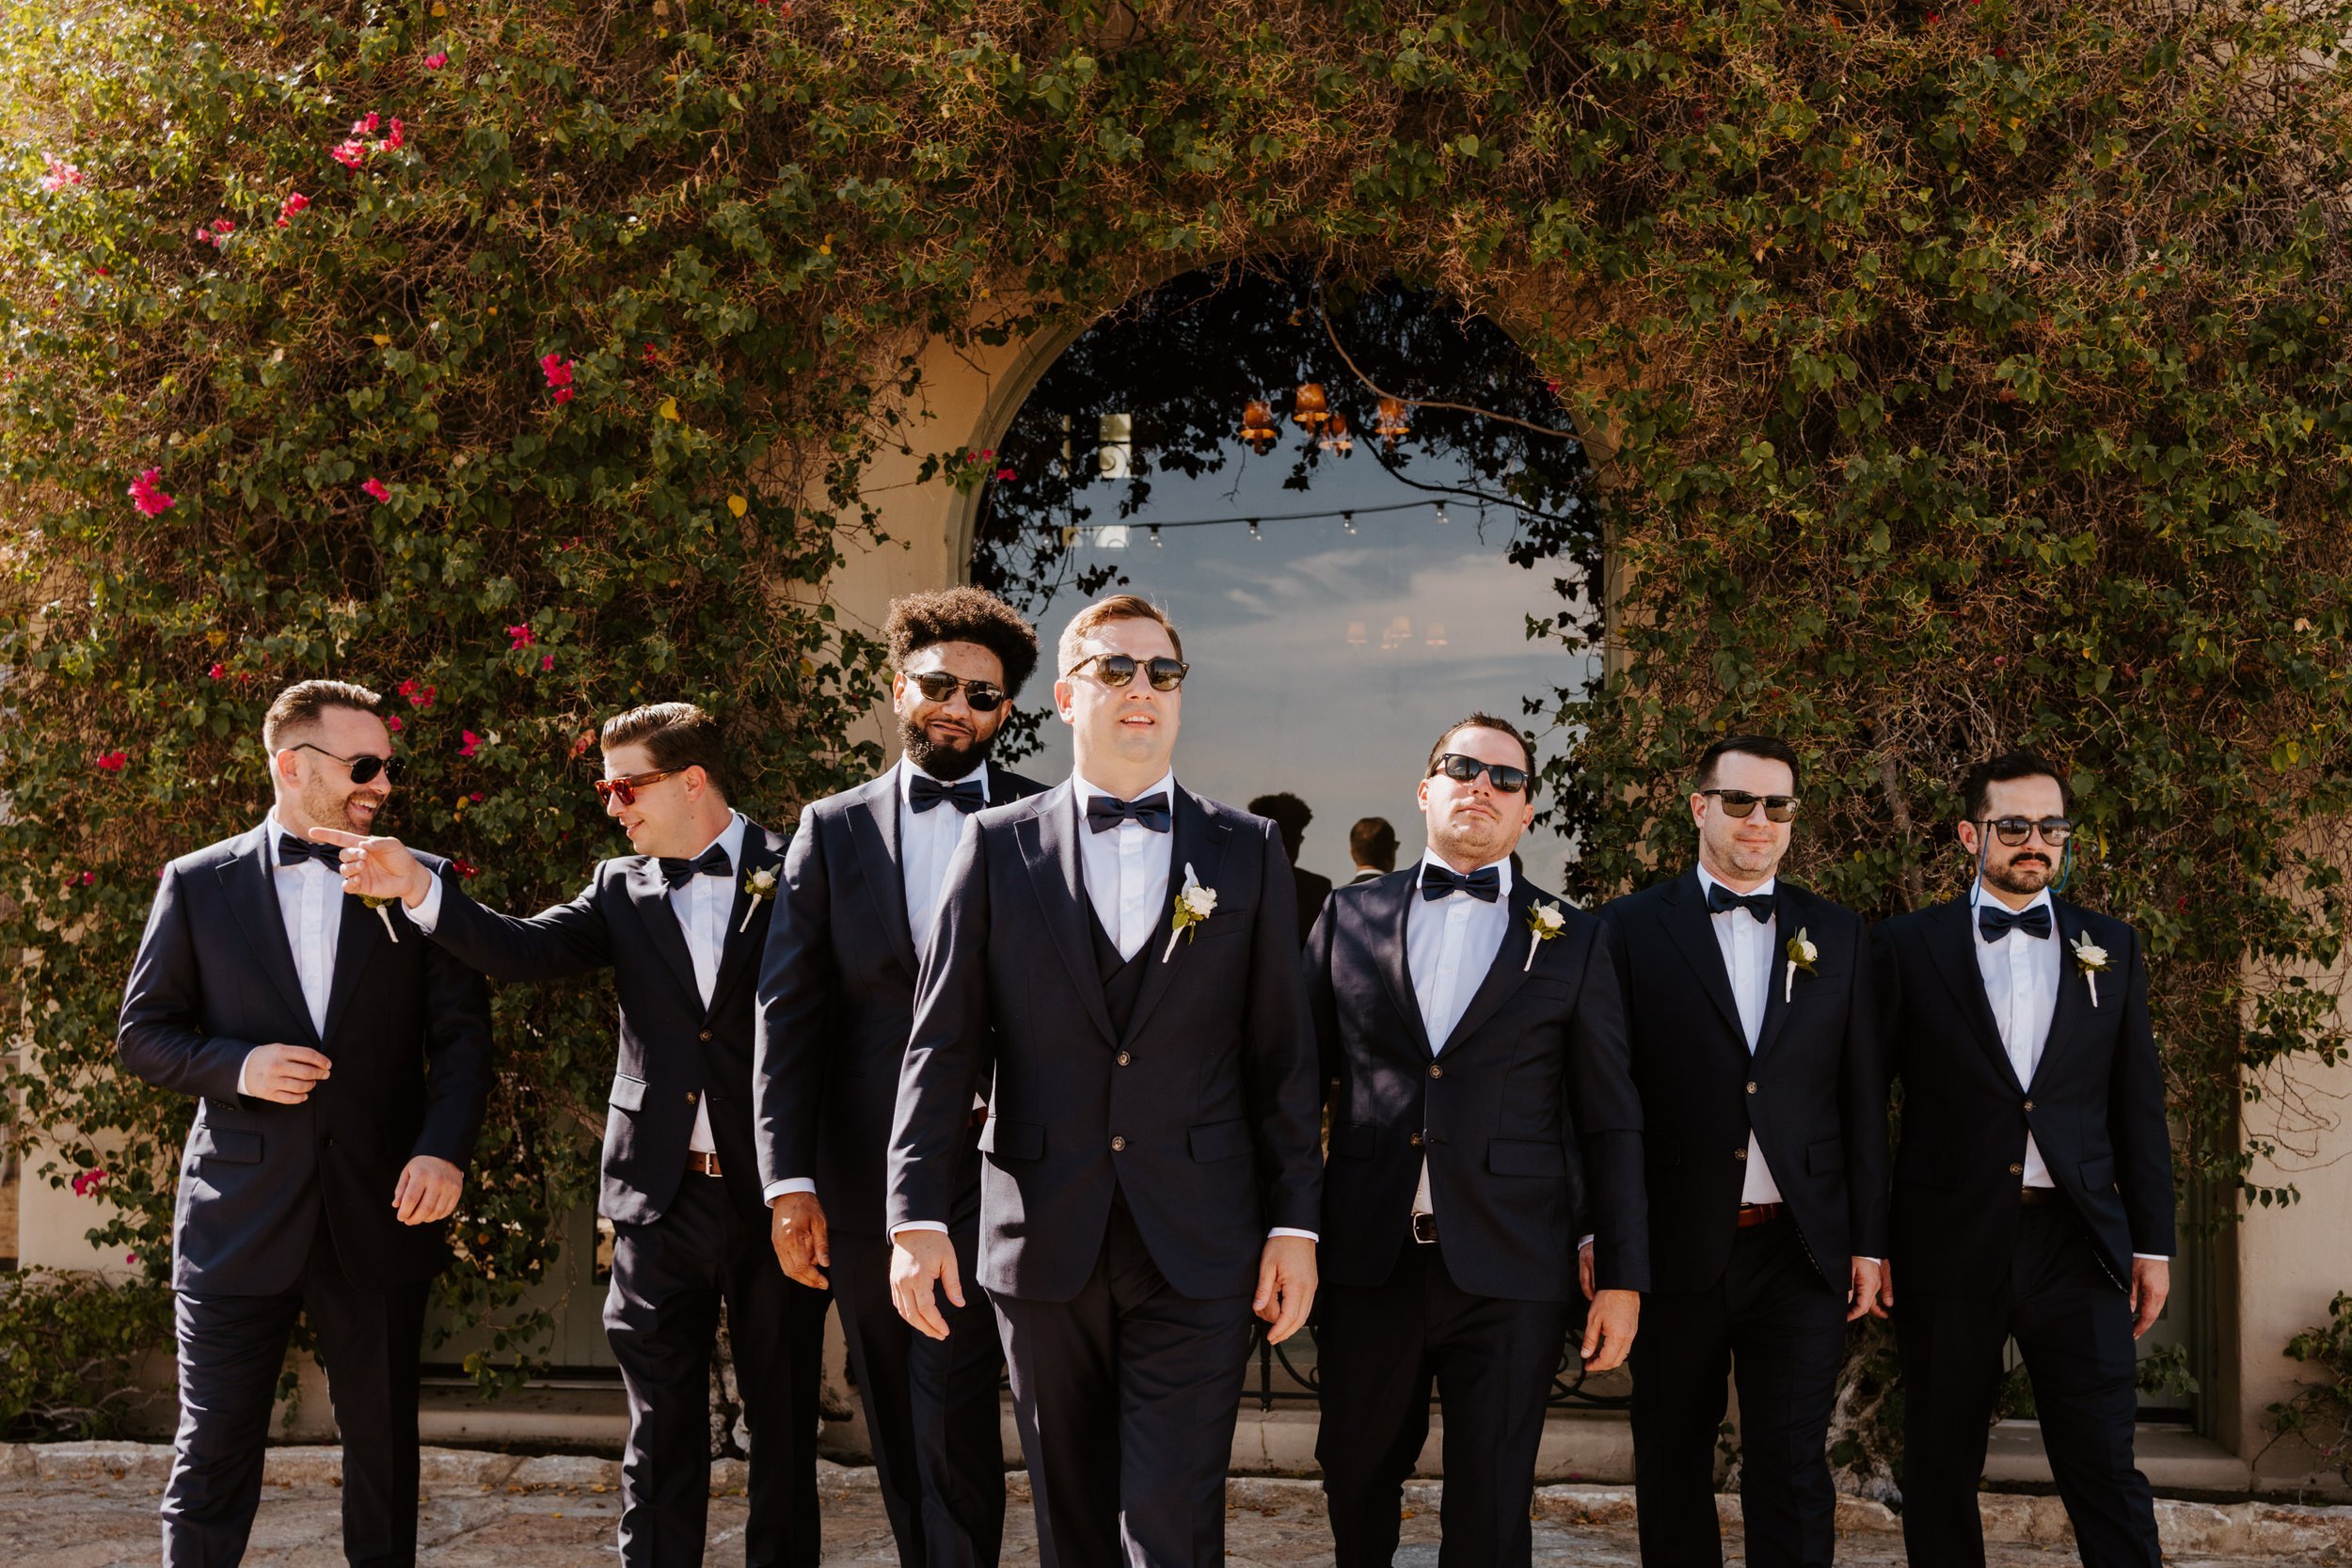 Groomsmen photo at The O’Donnell House Palm Springs, photography by Tida Svy